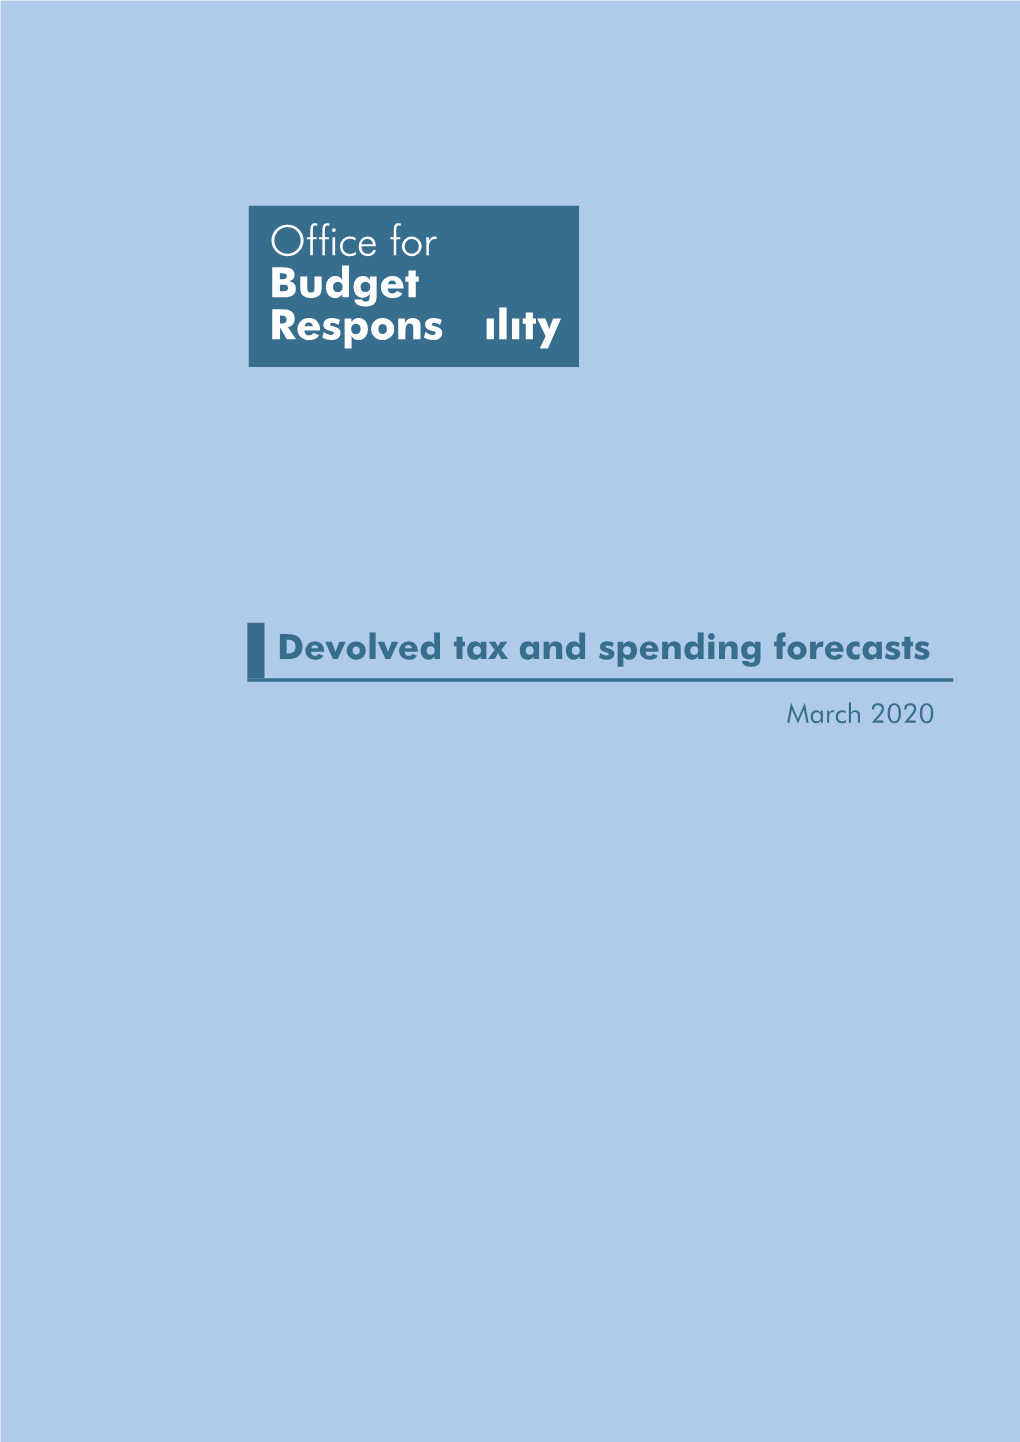 Devolved Tax and Spending Forecasts